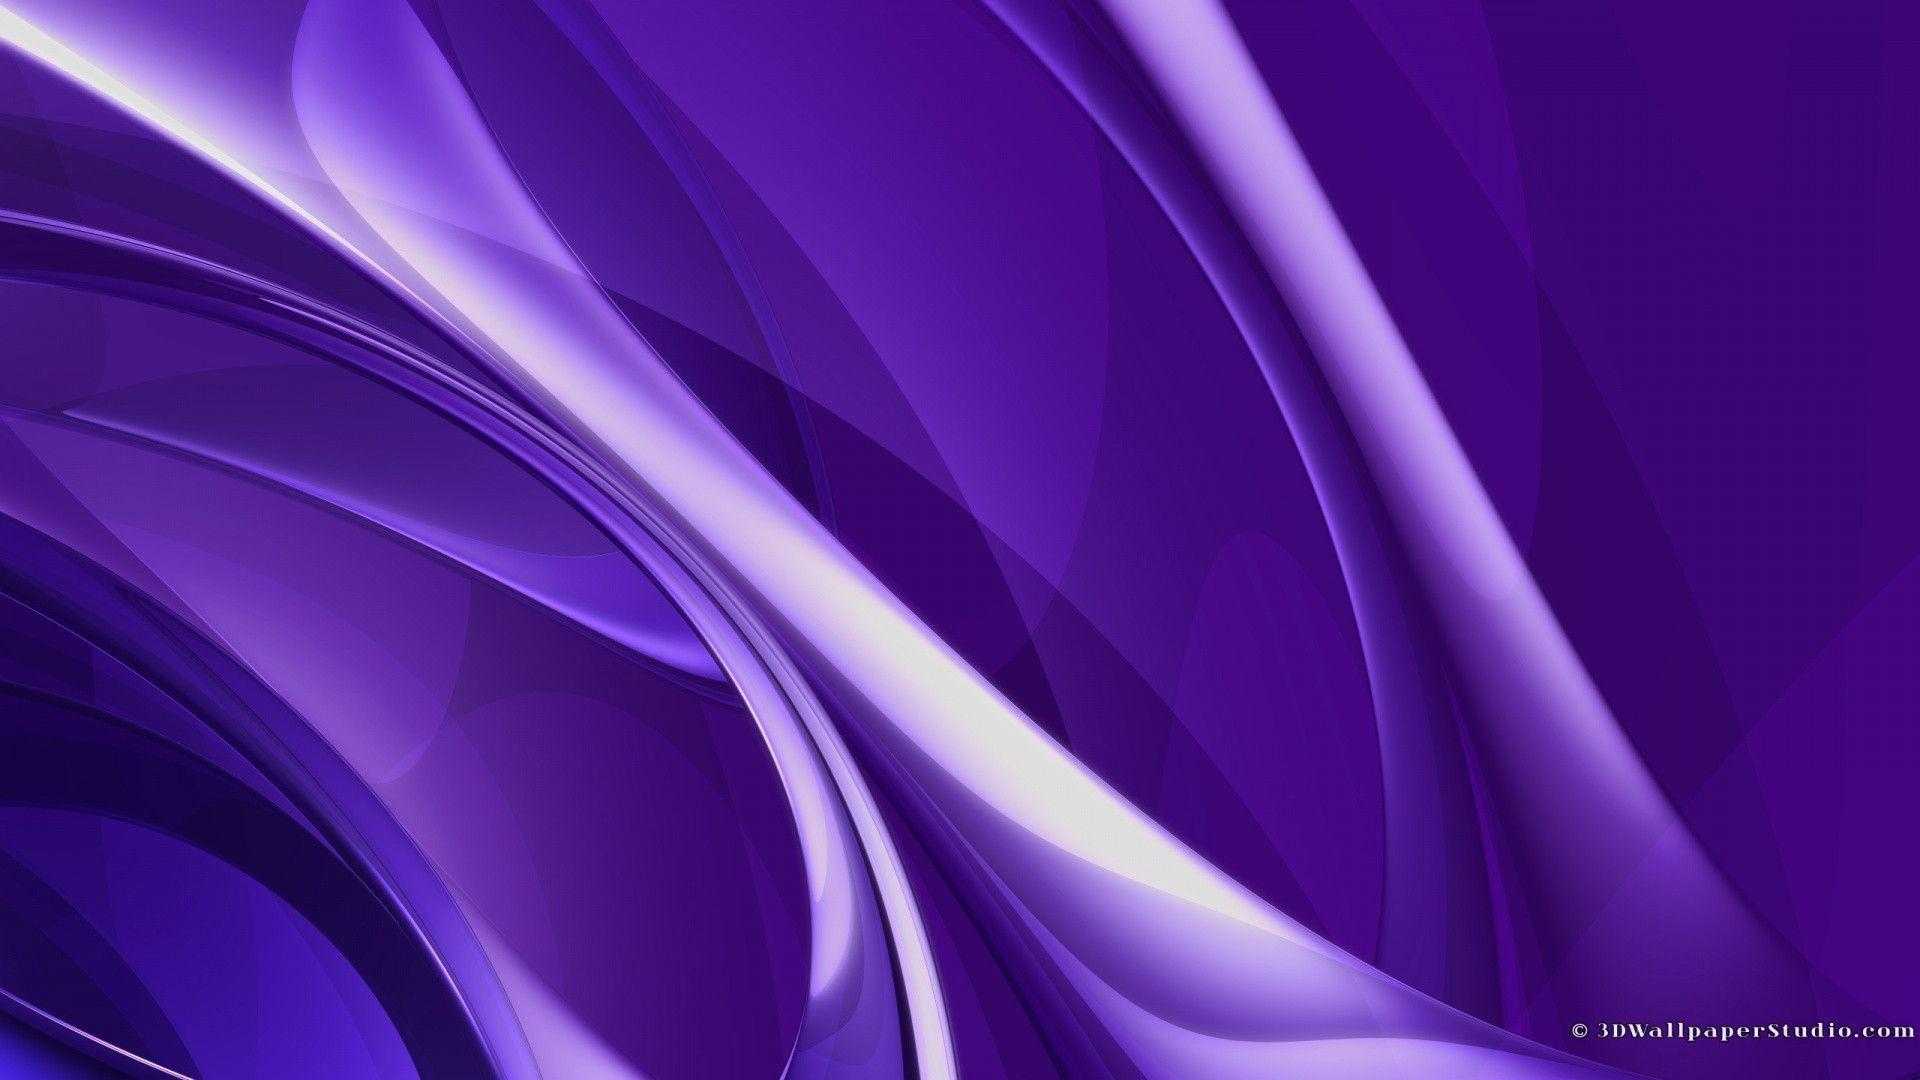 purple abstract wallpapers wallpaper cave on abstract purple wallpapers